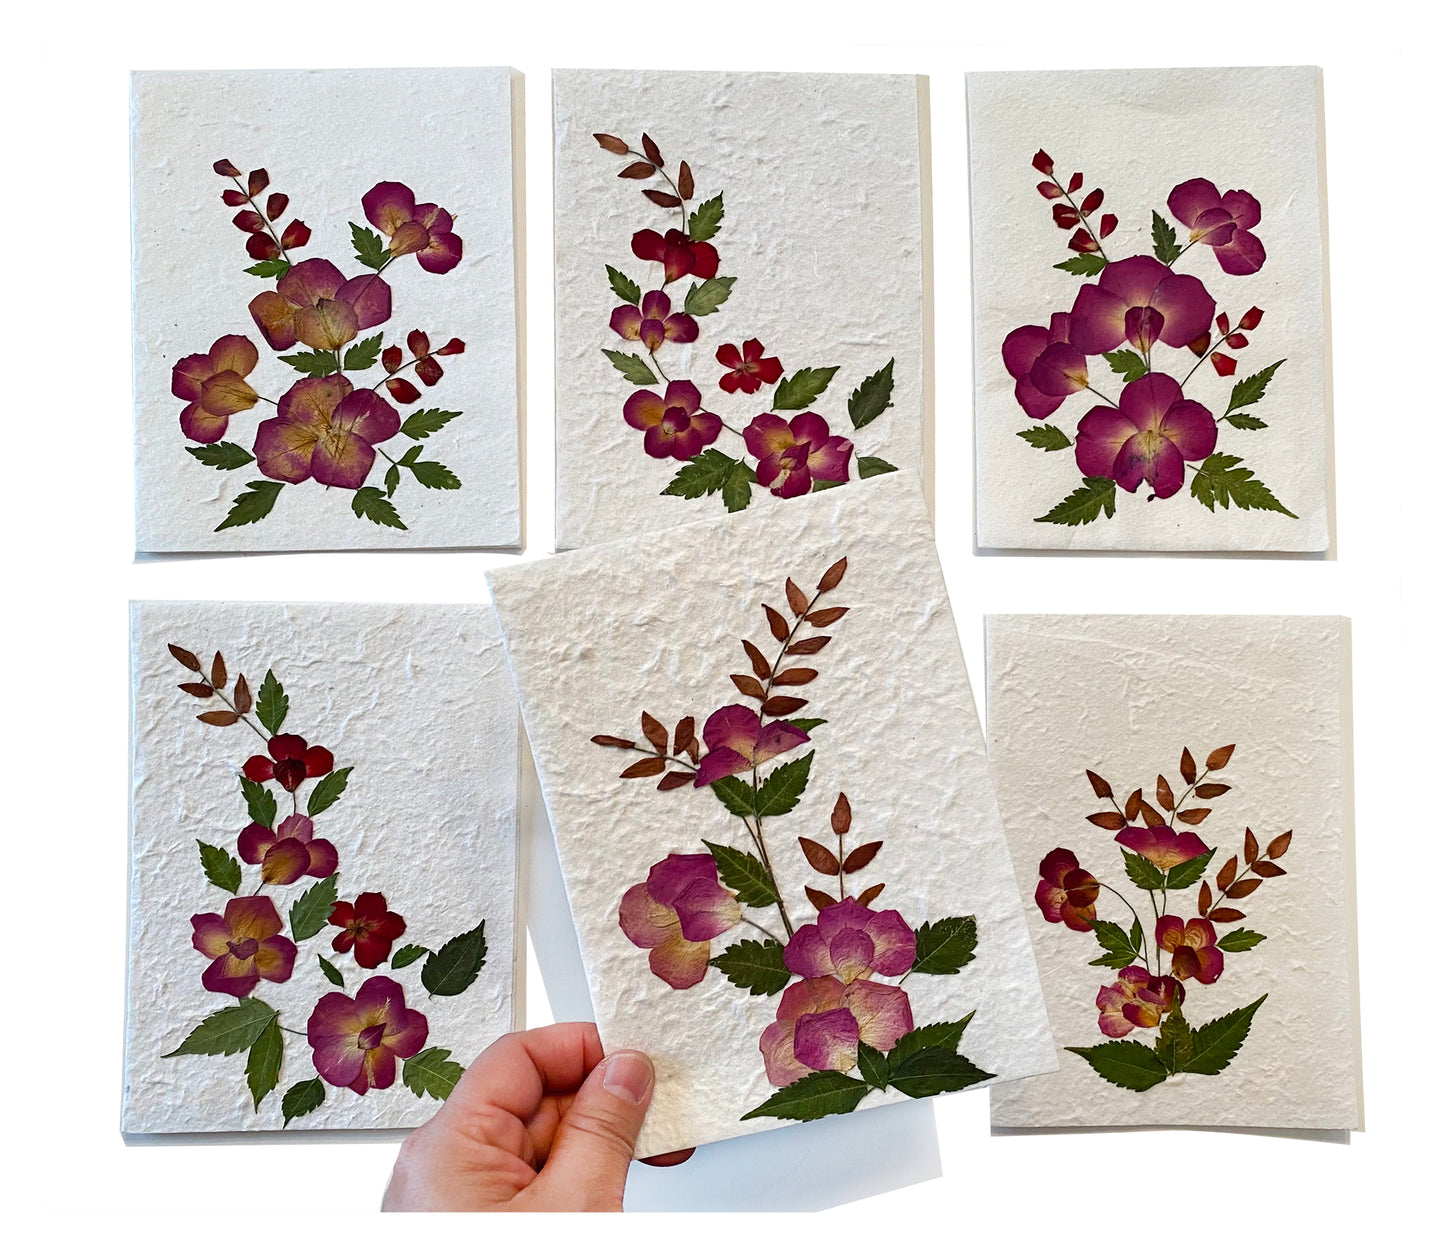 Sunne Tropical 3 Cards Random Pack Handmade Mulberry Paper Greeting Card 5x7 Inch Real Pressed Flowers - Rose Petal